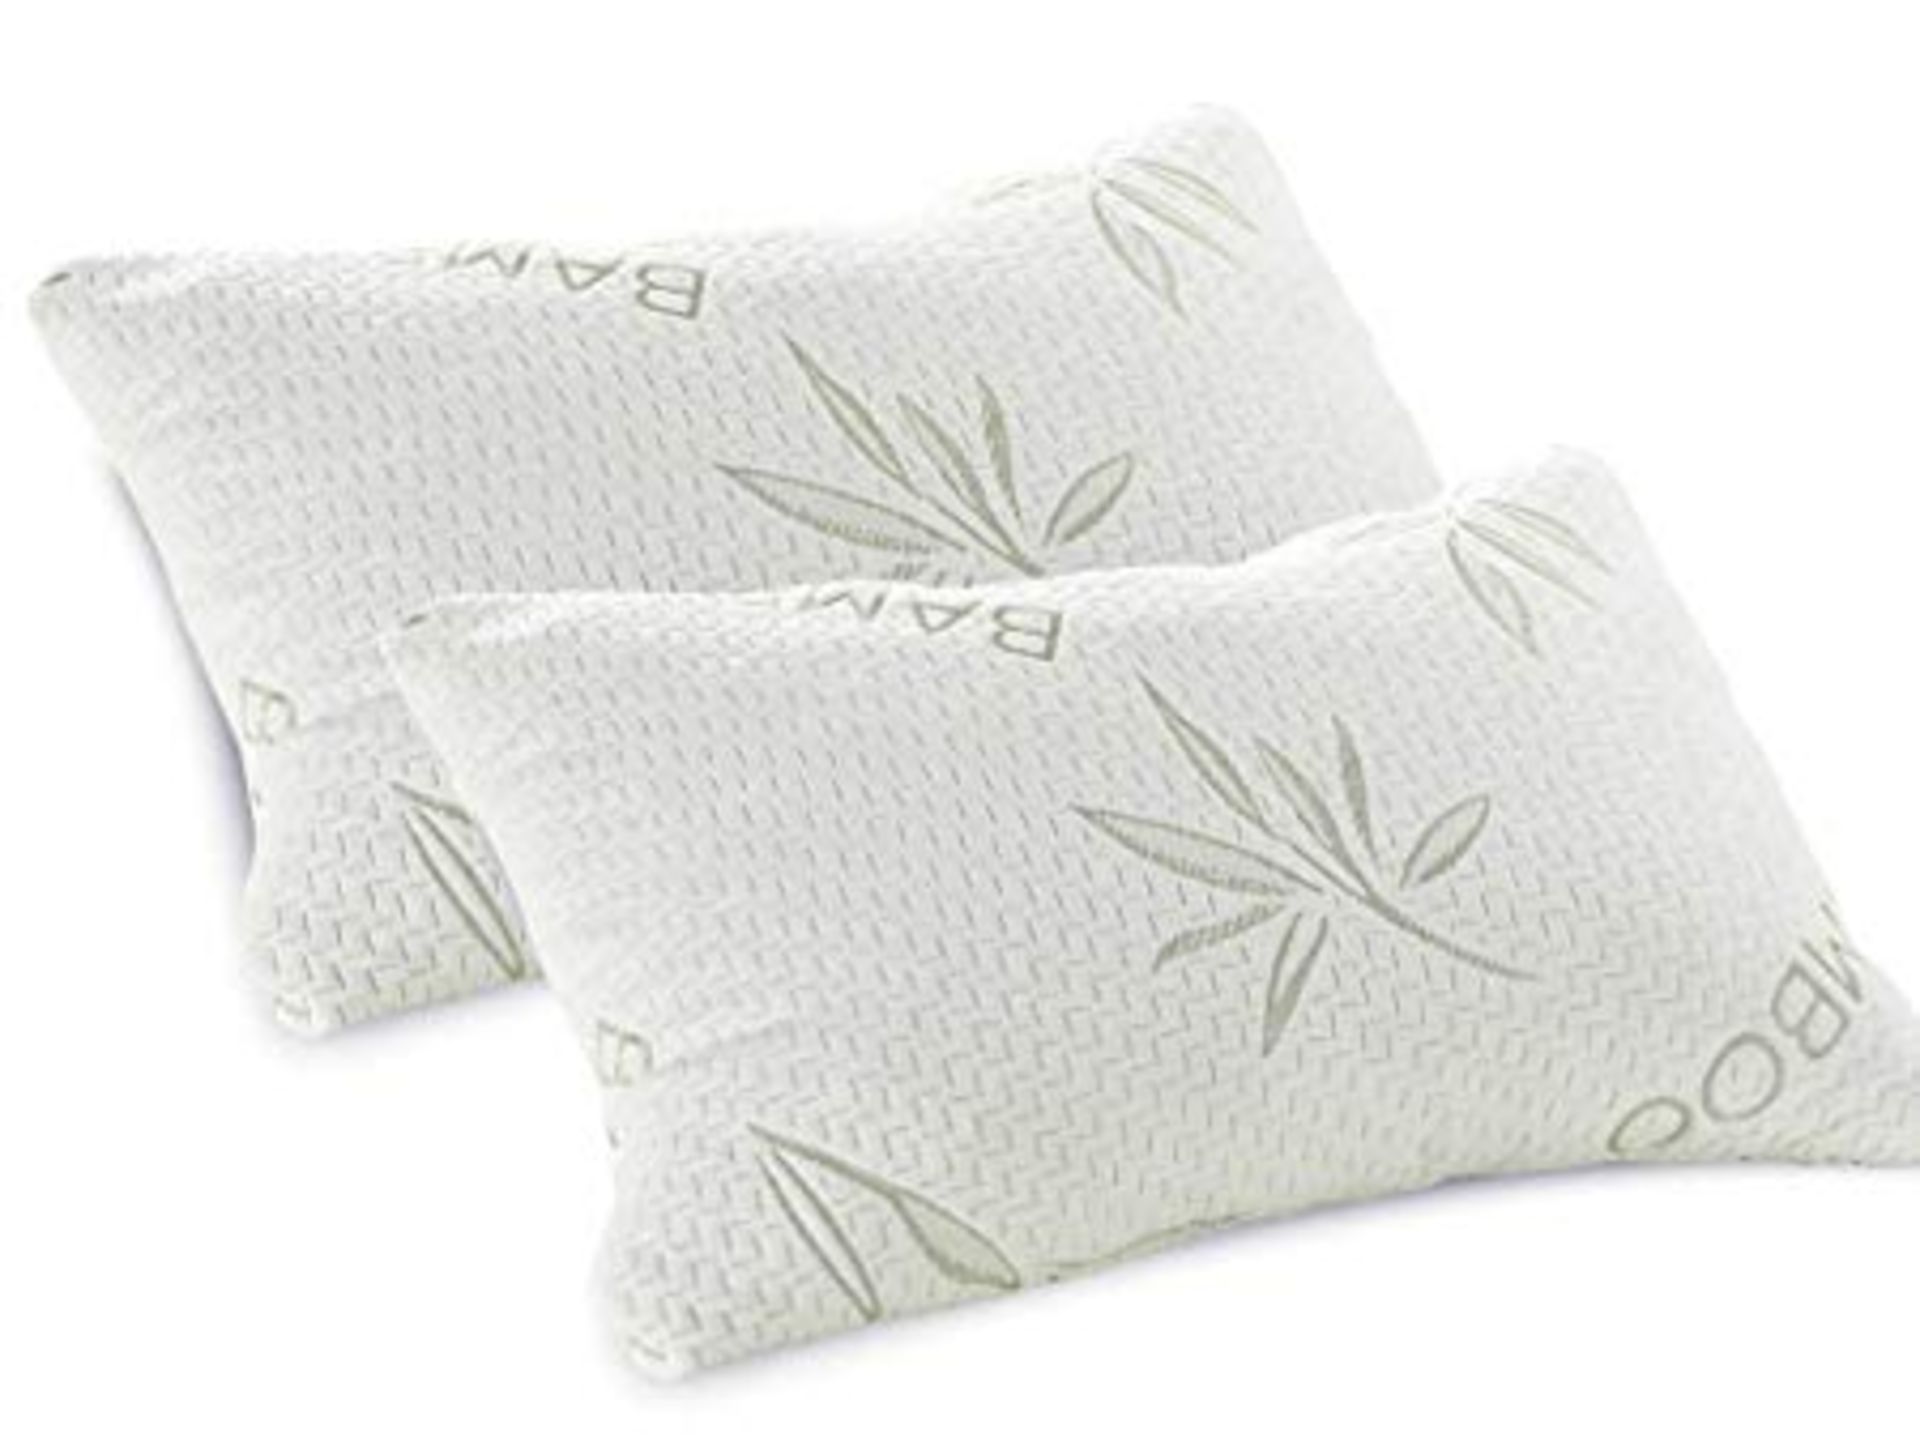 + VAT Brand New Memory foam pillow Eco cover resists mould and mites